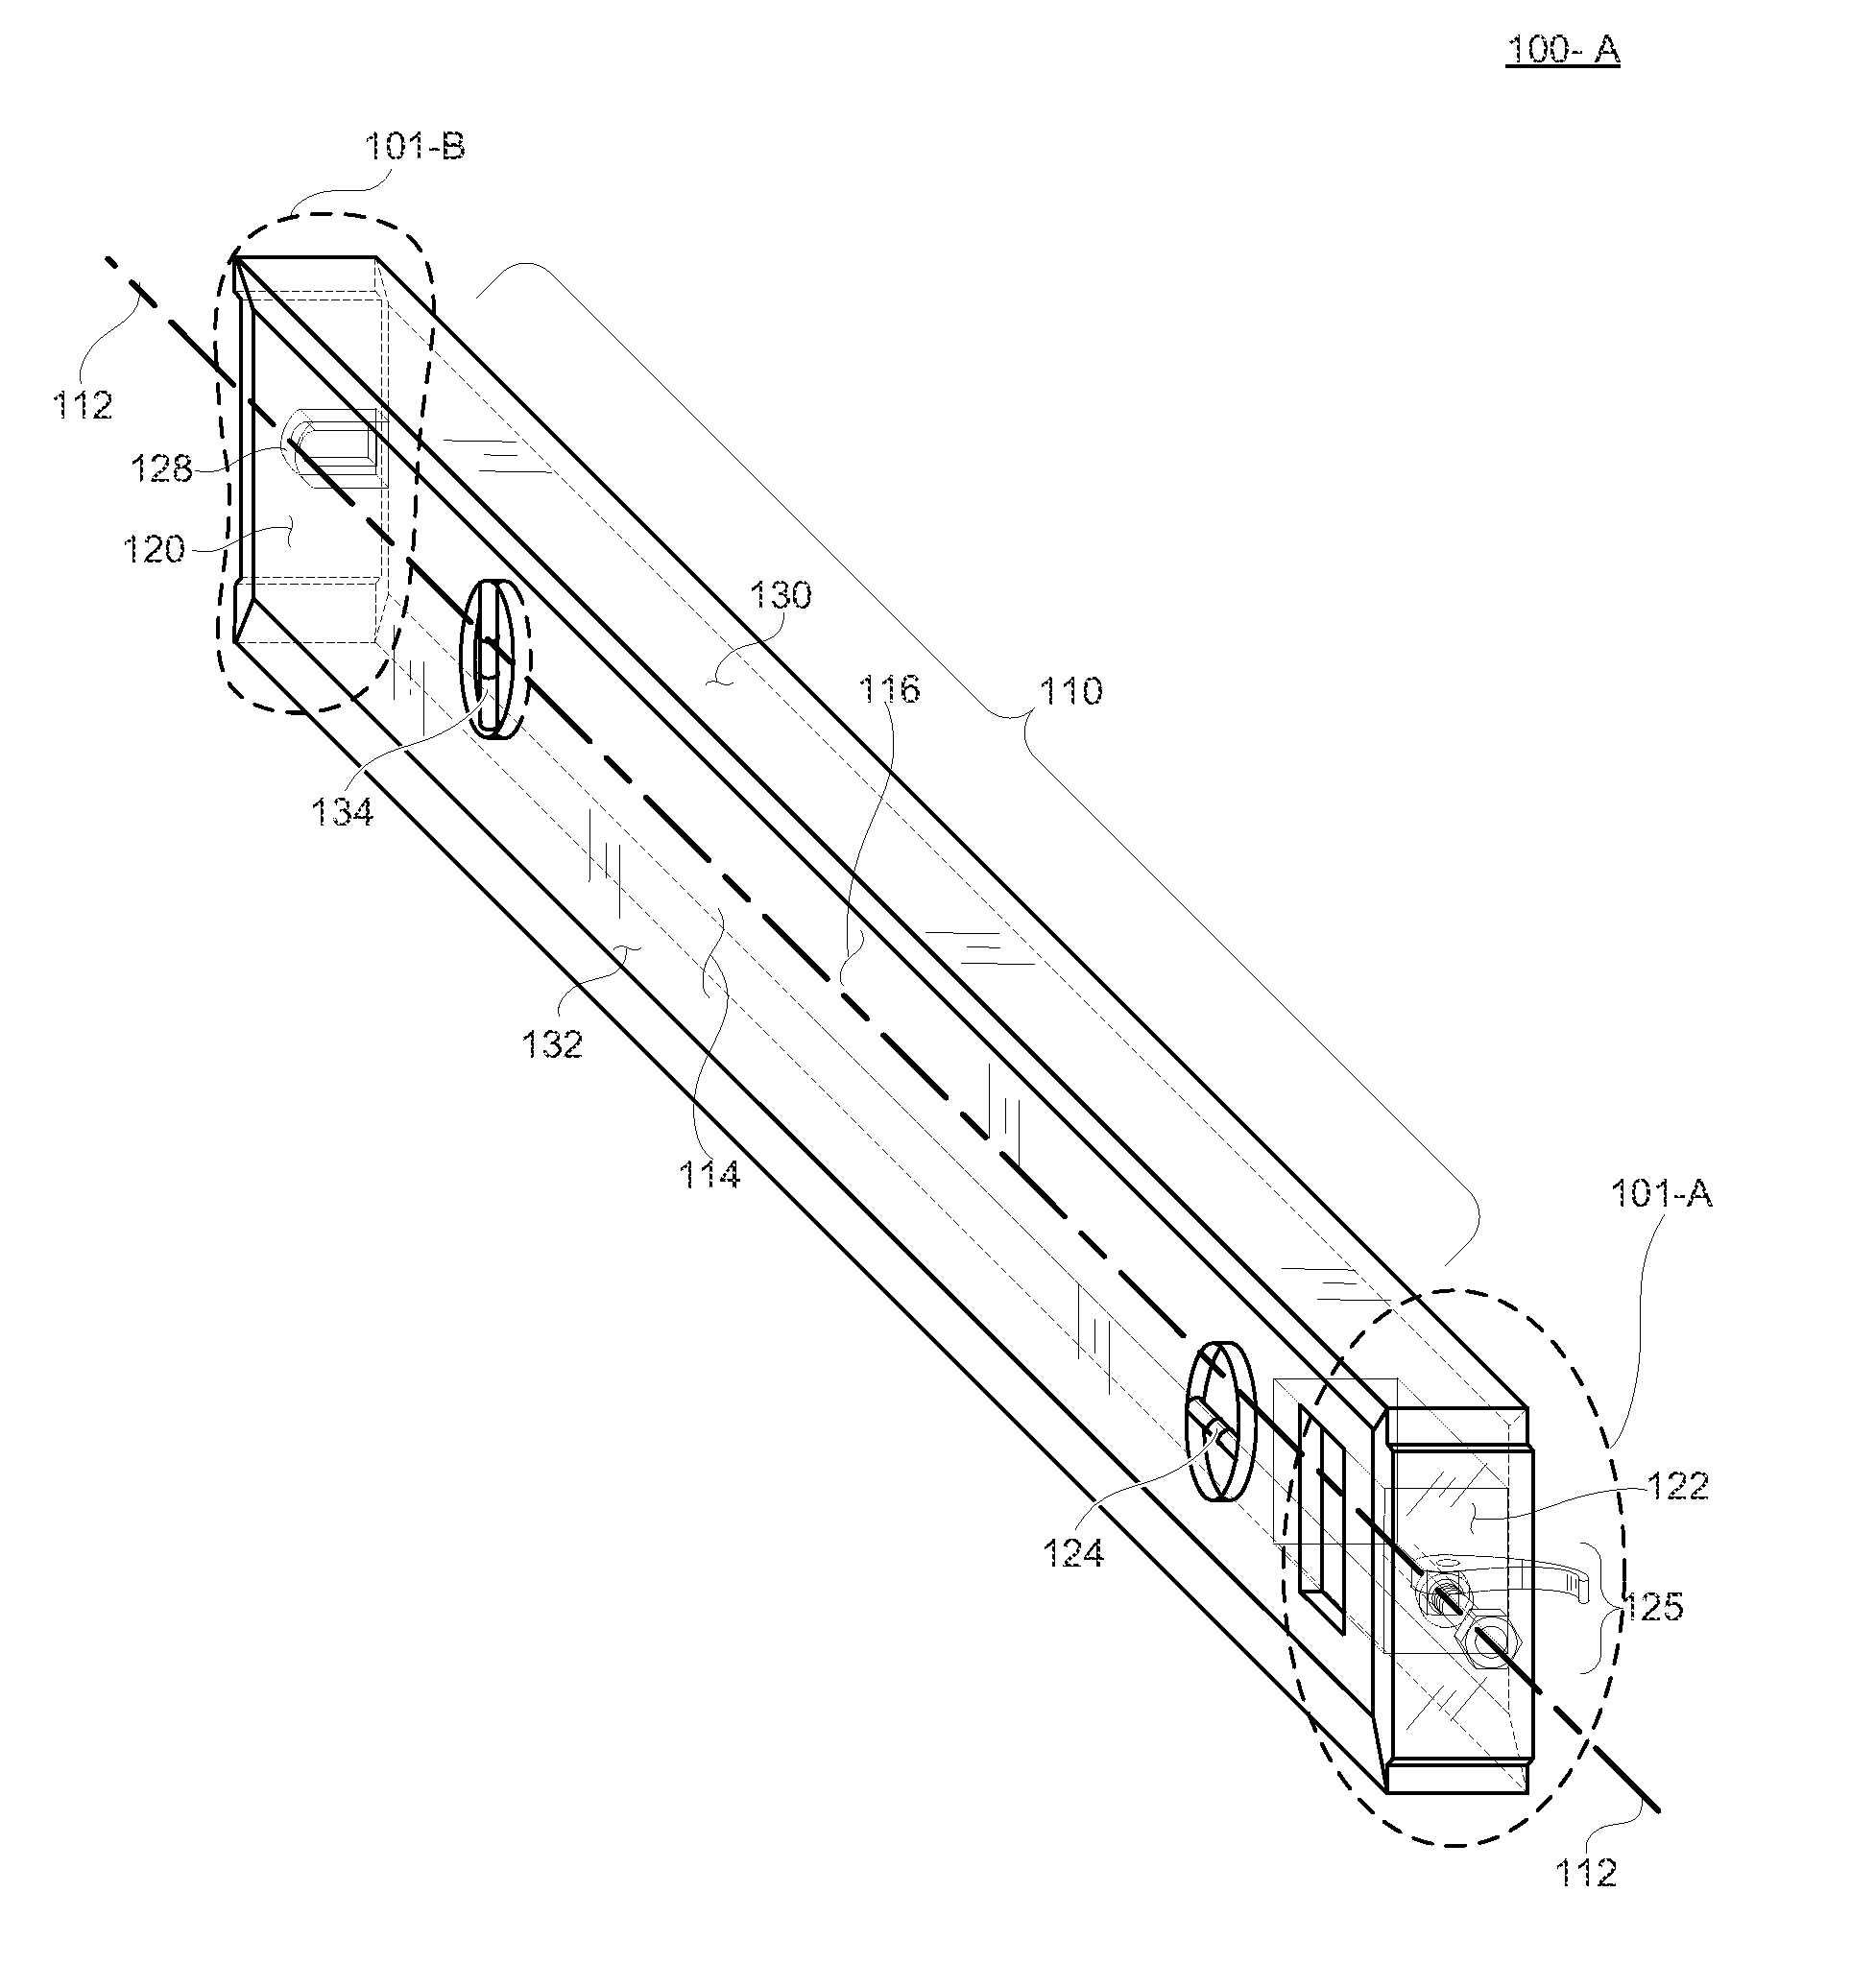 Multi-function level with hands-free retaining system